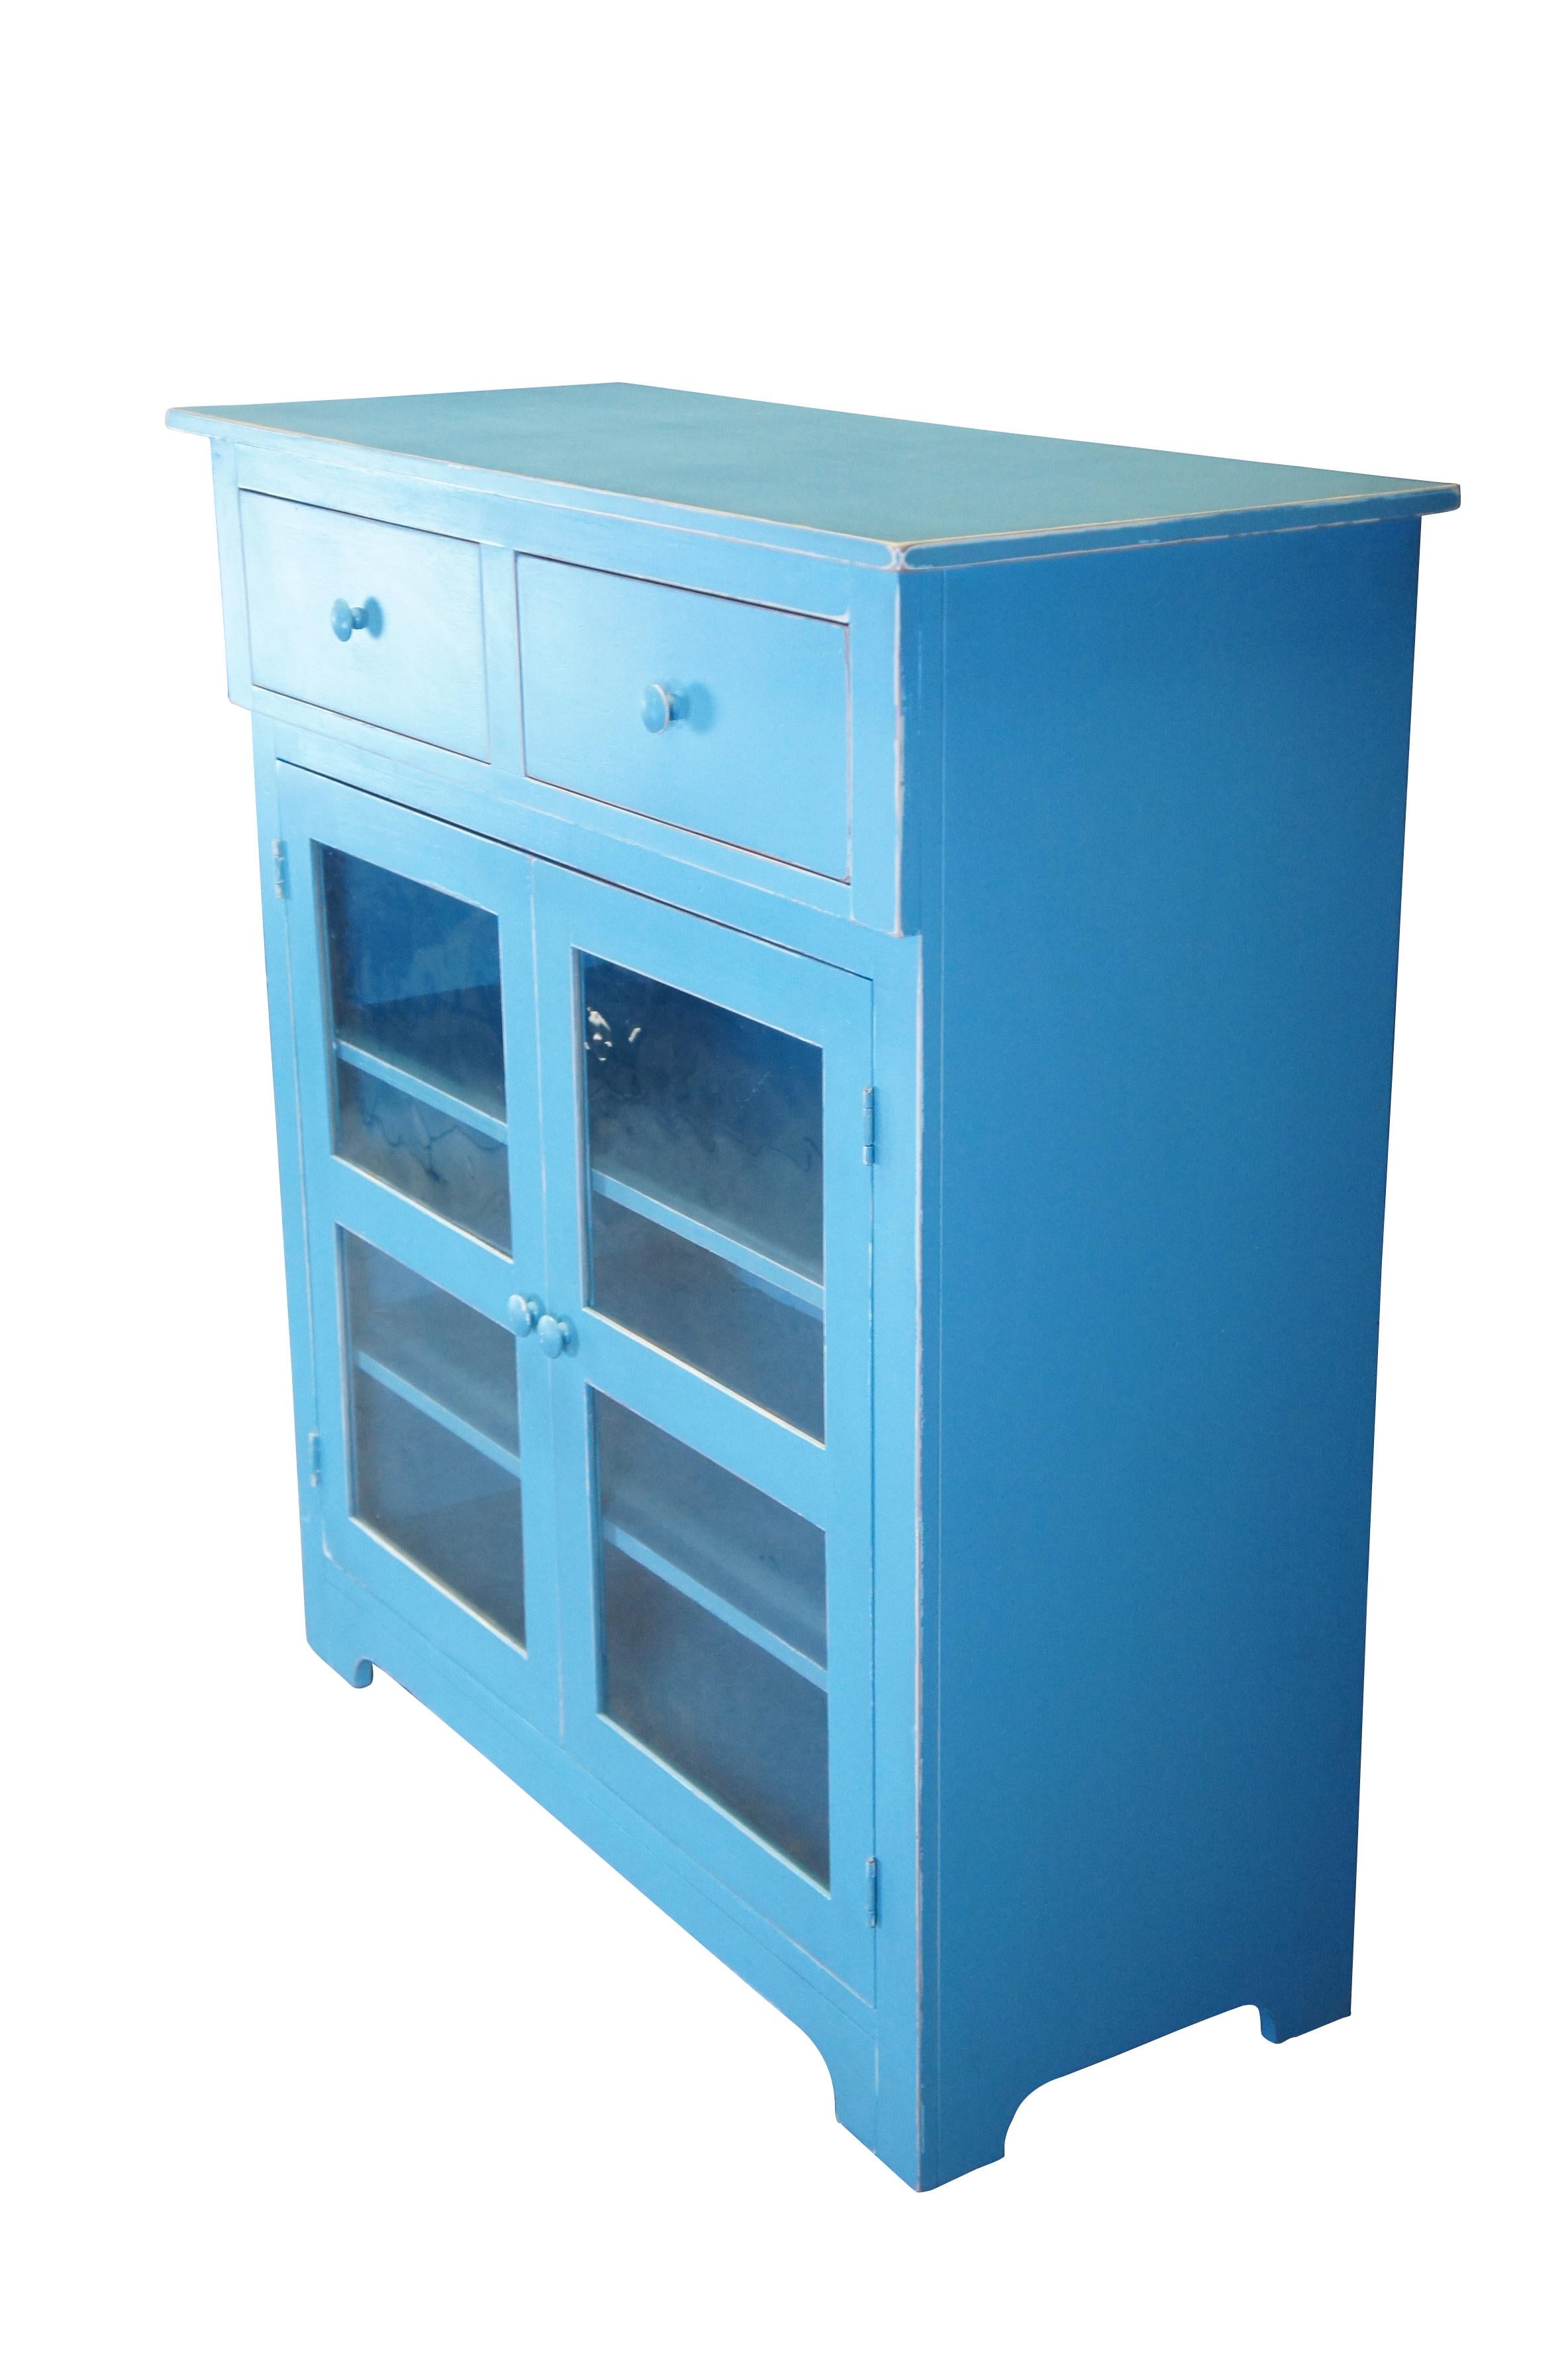 Rustic Vintage Jasper Blue Jelly Cabinet Cupboard Curio Display Buffet Console Table For Sale